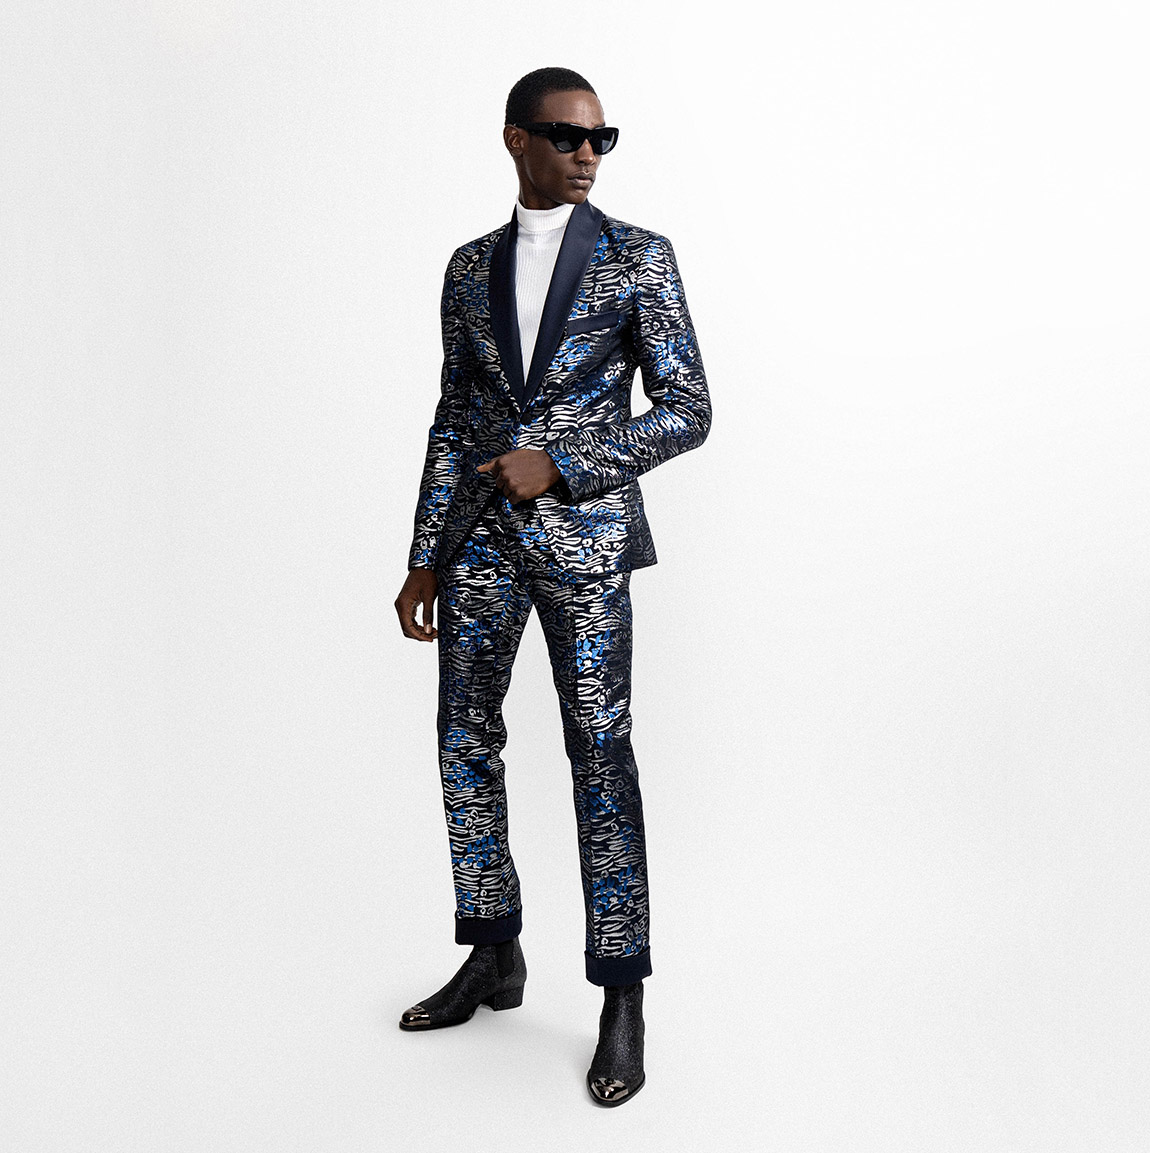 MARCELL VON BERLIN: POWER SUITS COMBINED WITH UNIQUE PRINTS CREATE A RED-CARPET-READY FASHION STATEMENT